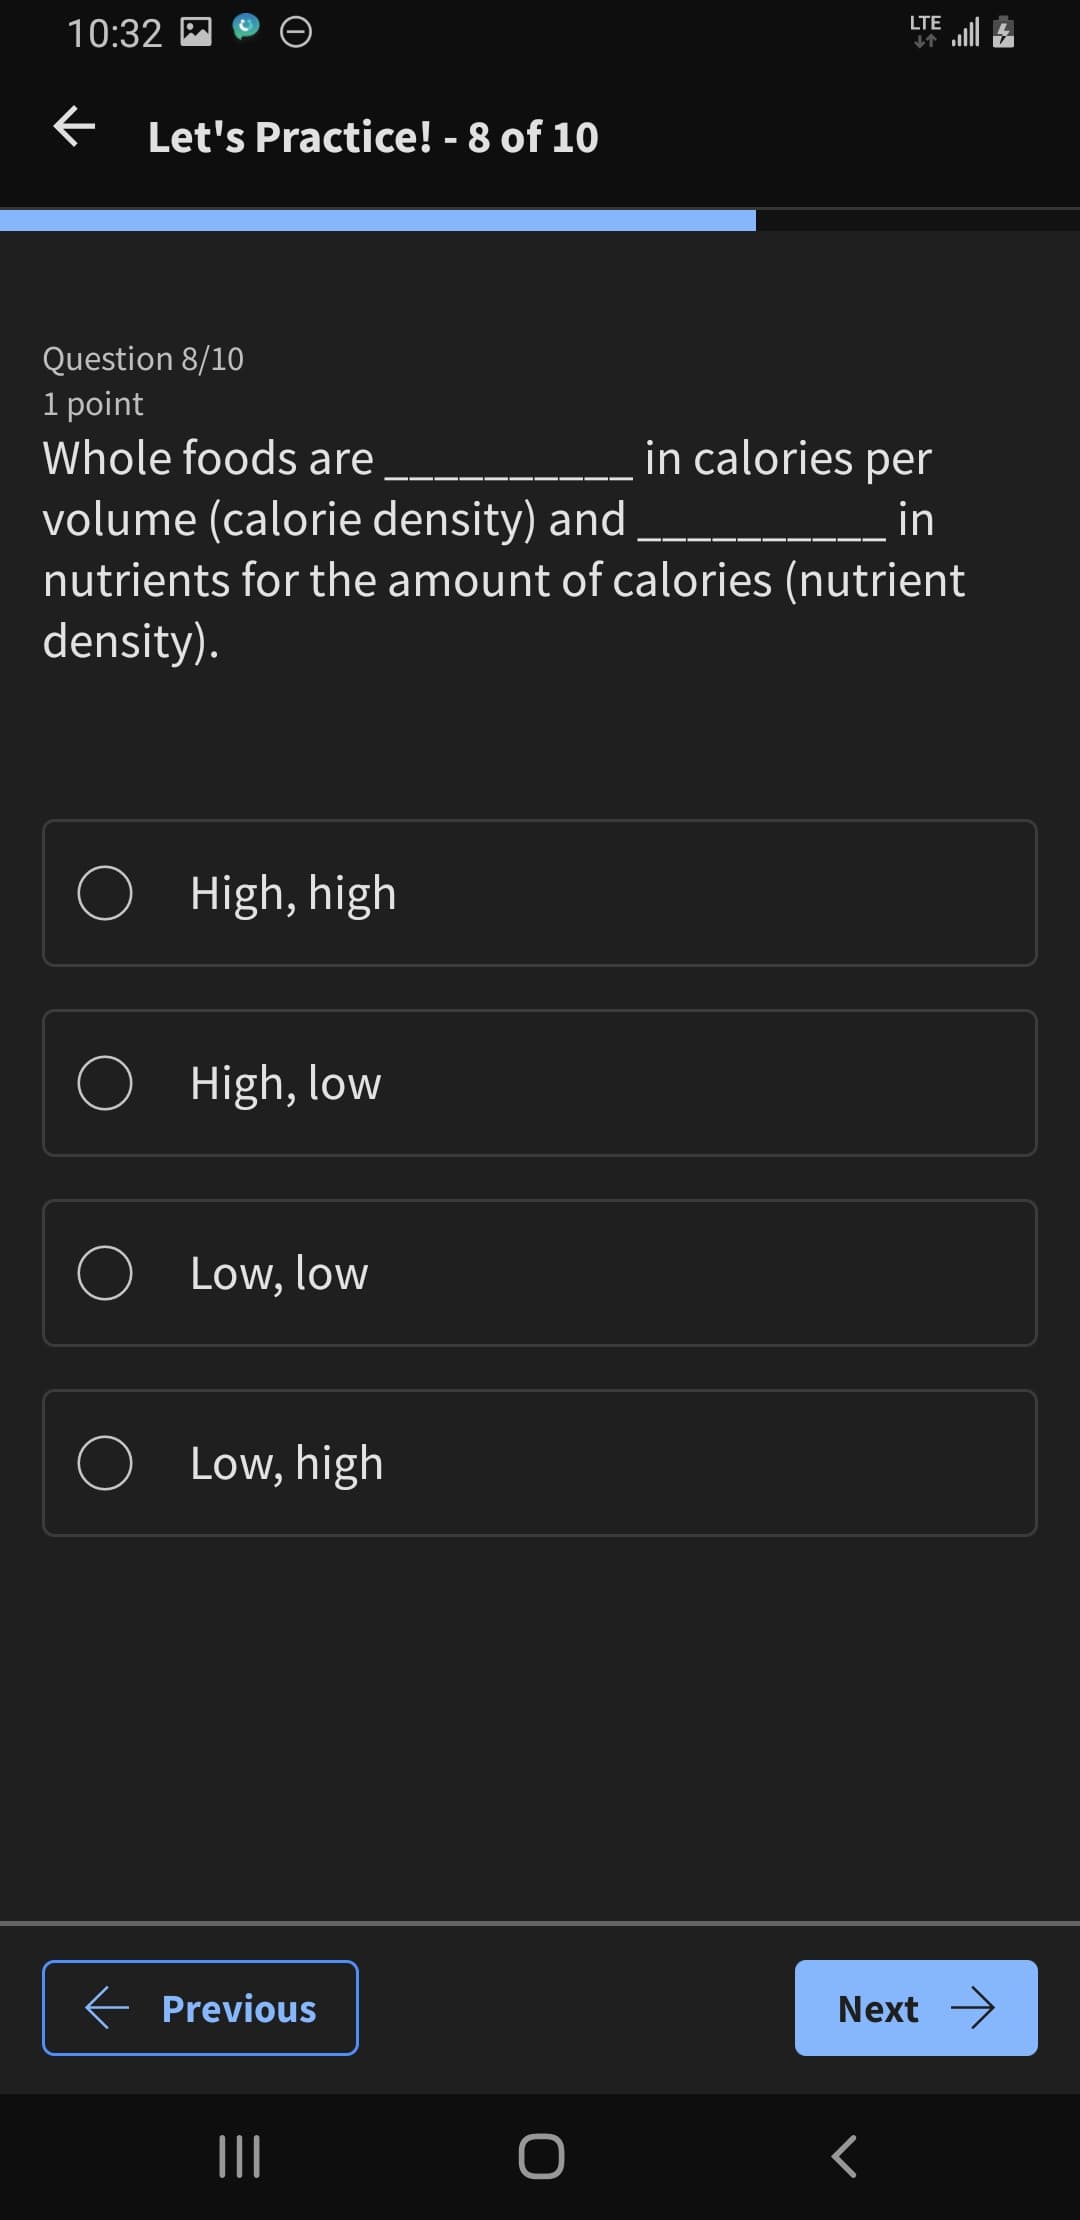 10:32
← Let's Practice! - 8 of 10
LTE
Question 8/10
1 point
Whole foods are
volume (calorie density) and
in calories per
in
nutrients for the amount of calories (nutrient
density).
High, high
High, low
Low, low
○
Low, high
← Previous
|||
O
Next →
<